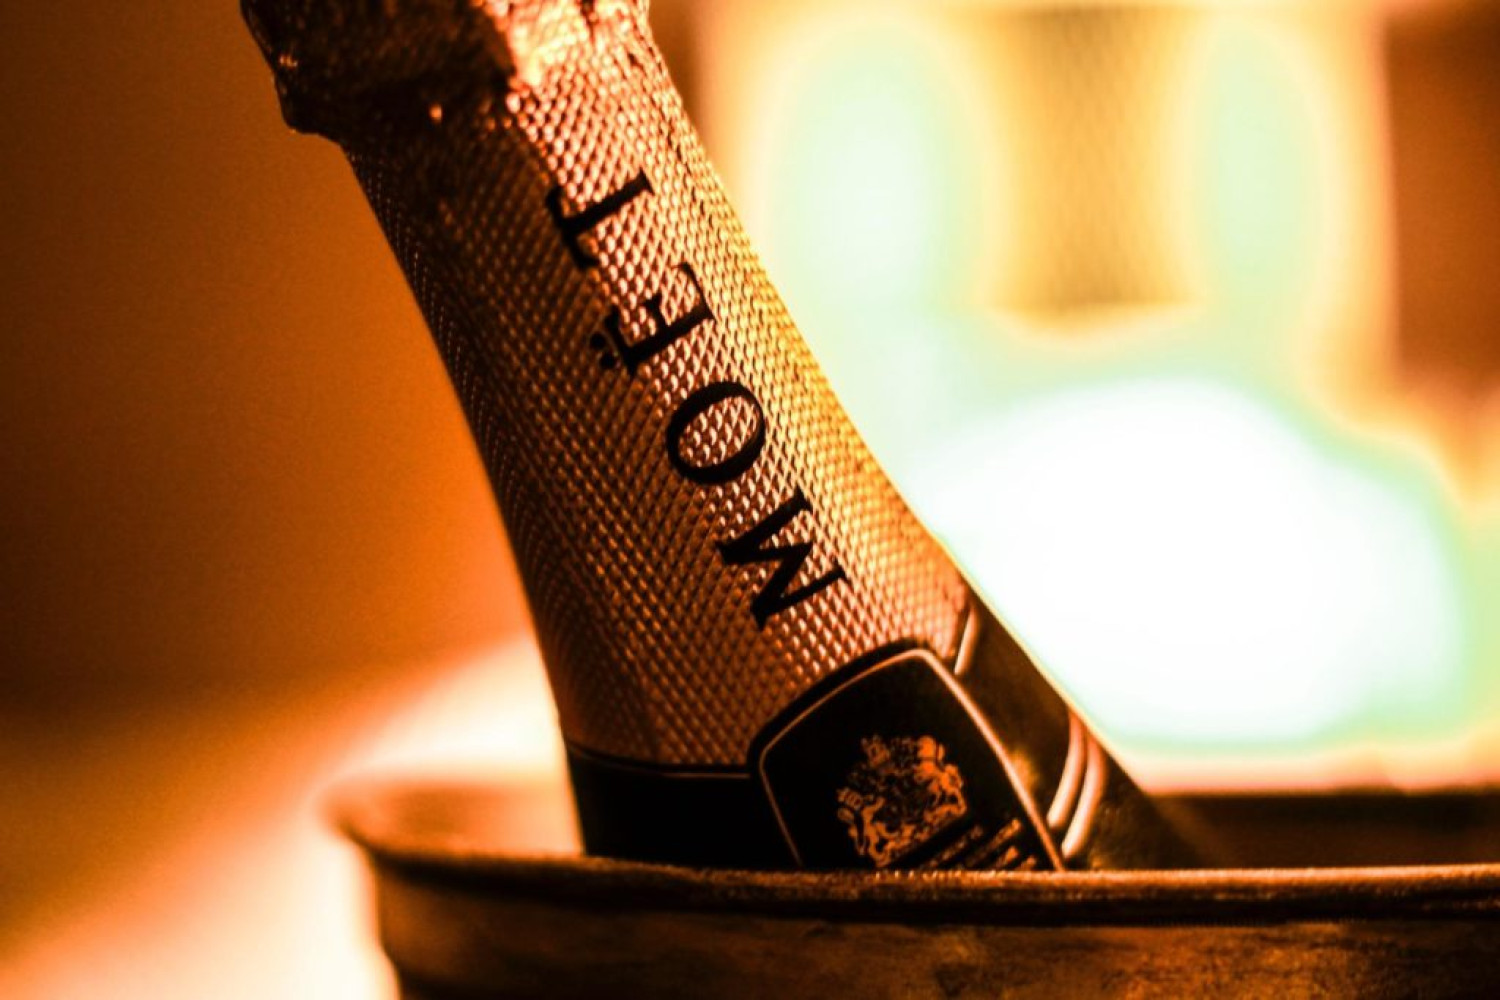 Artistic shot of the top of a bottle of Moet - Cocktail & alcohol delivery - Celebrating during Covid19 lockdown